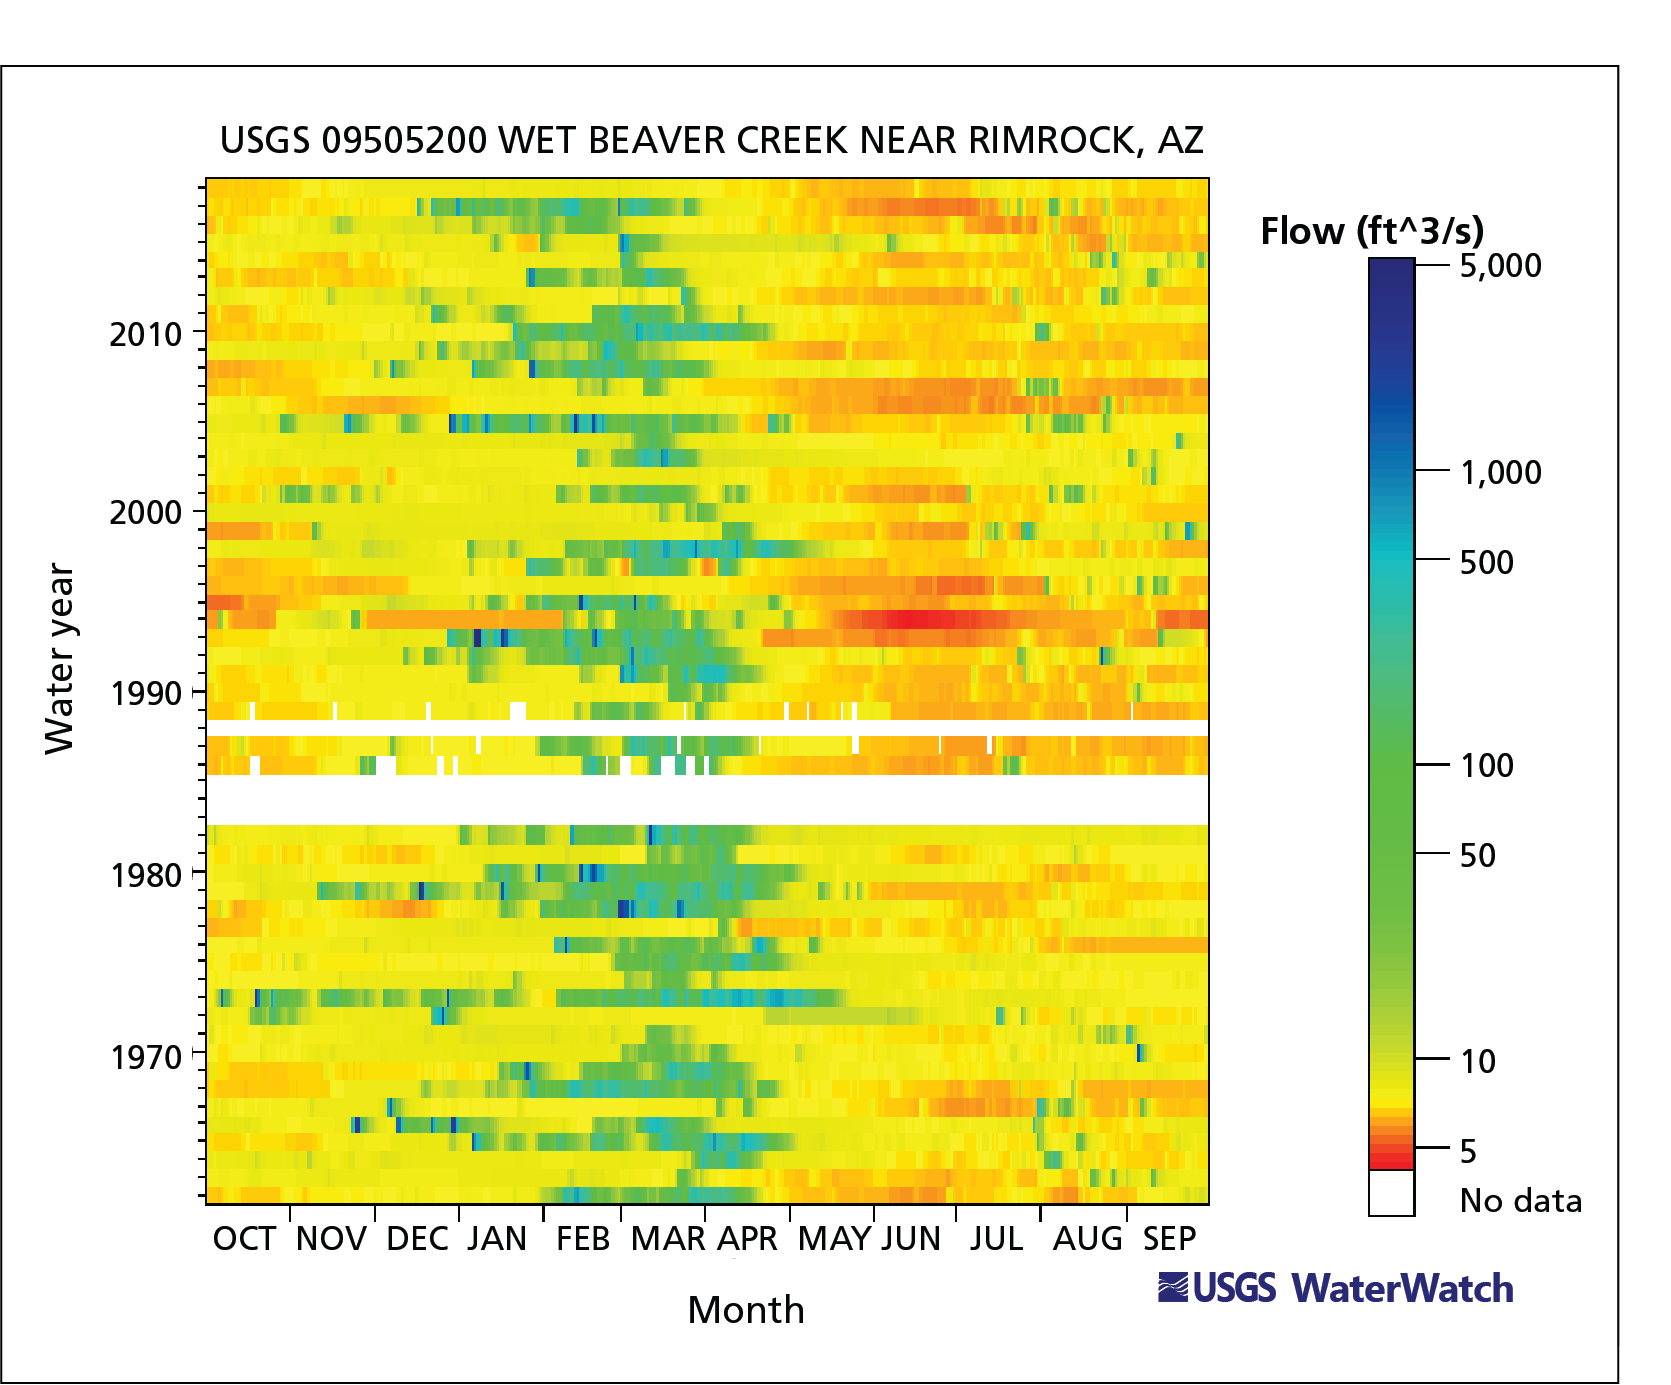 Water year (y-axis) graphed against months of the water year (x-axis). Graph is filled with pixels representing flow. Low flow is shown in red, progressing to dark blue. Most years show some green and/or blue, but WY2018 does not.